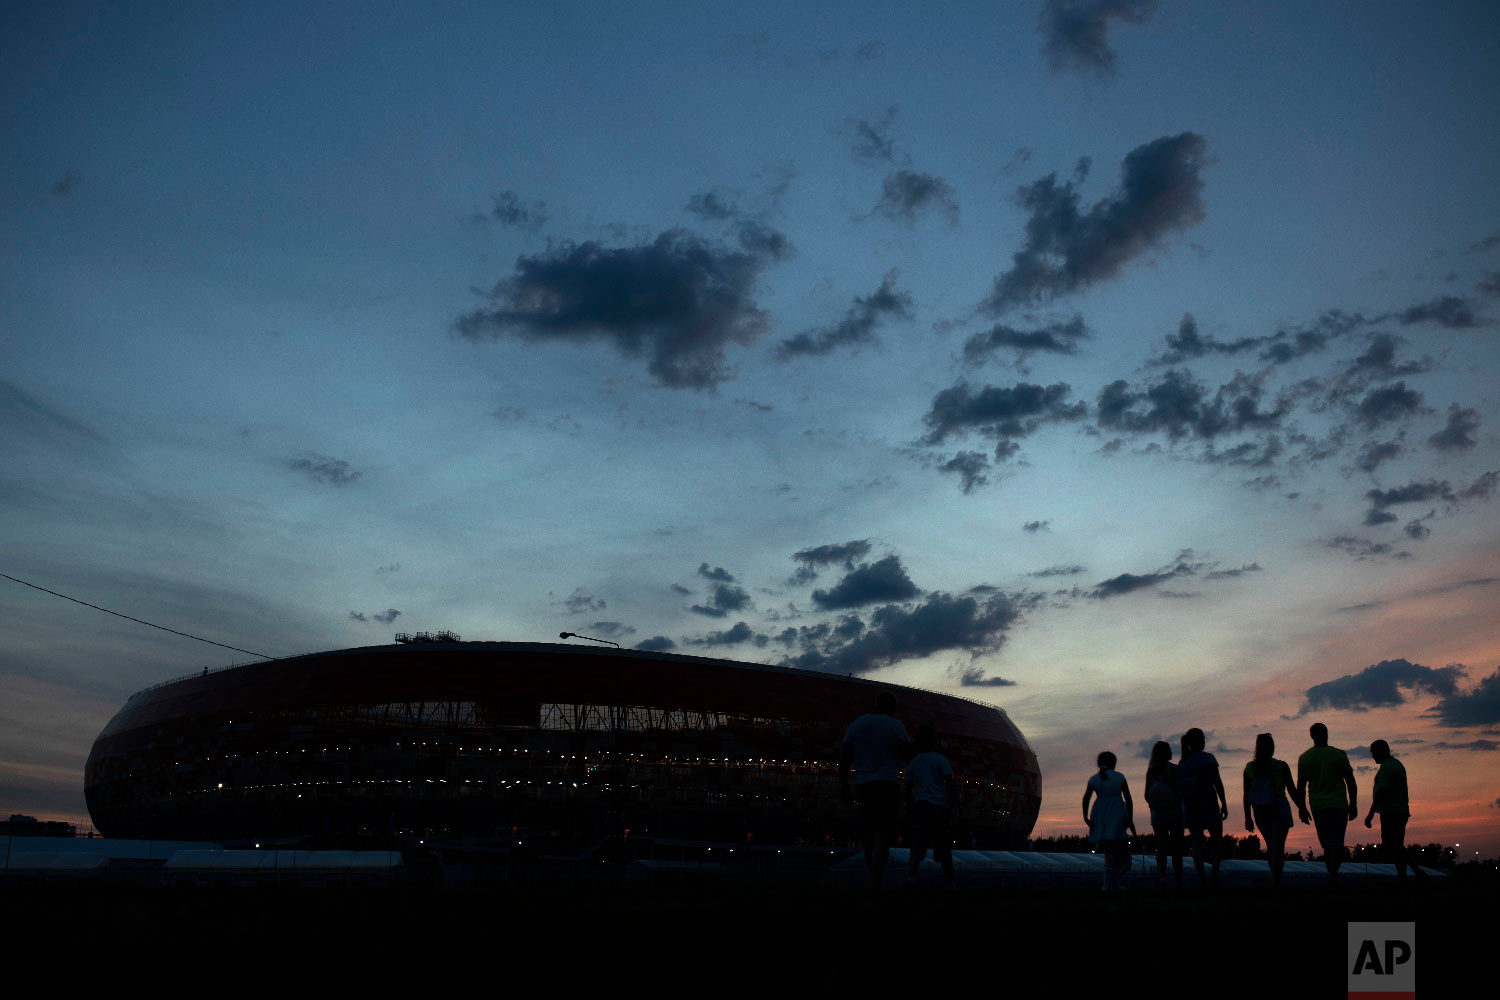  People walk next to the Mordovia Arena stadium as the sun sets at the 2018 soccer World Cup in Saransk, Russia on June 24, 2018. (AP Photo/Francisco Seco) 